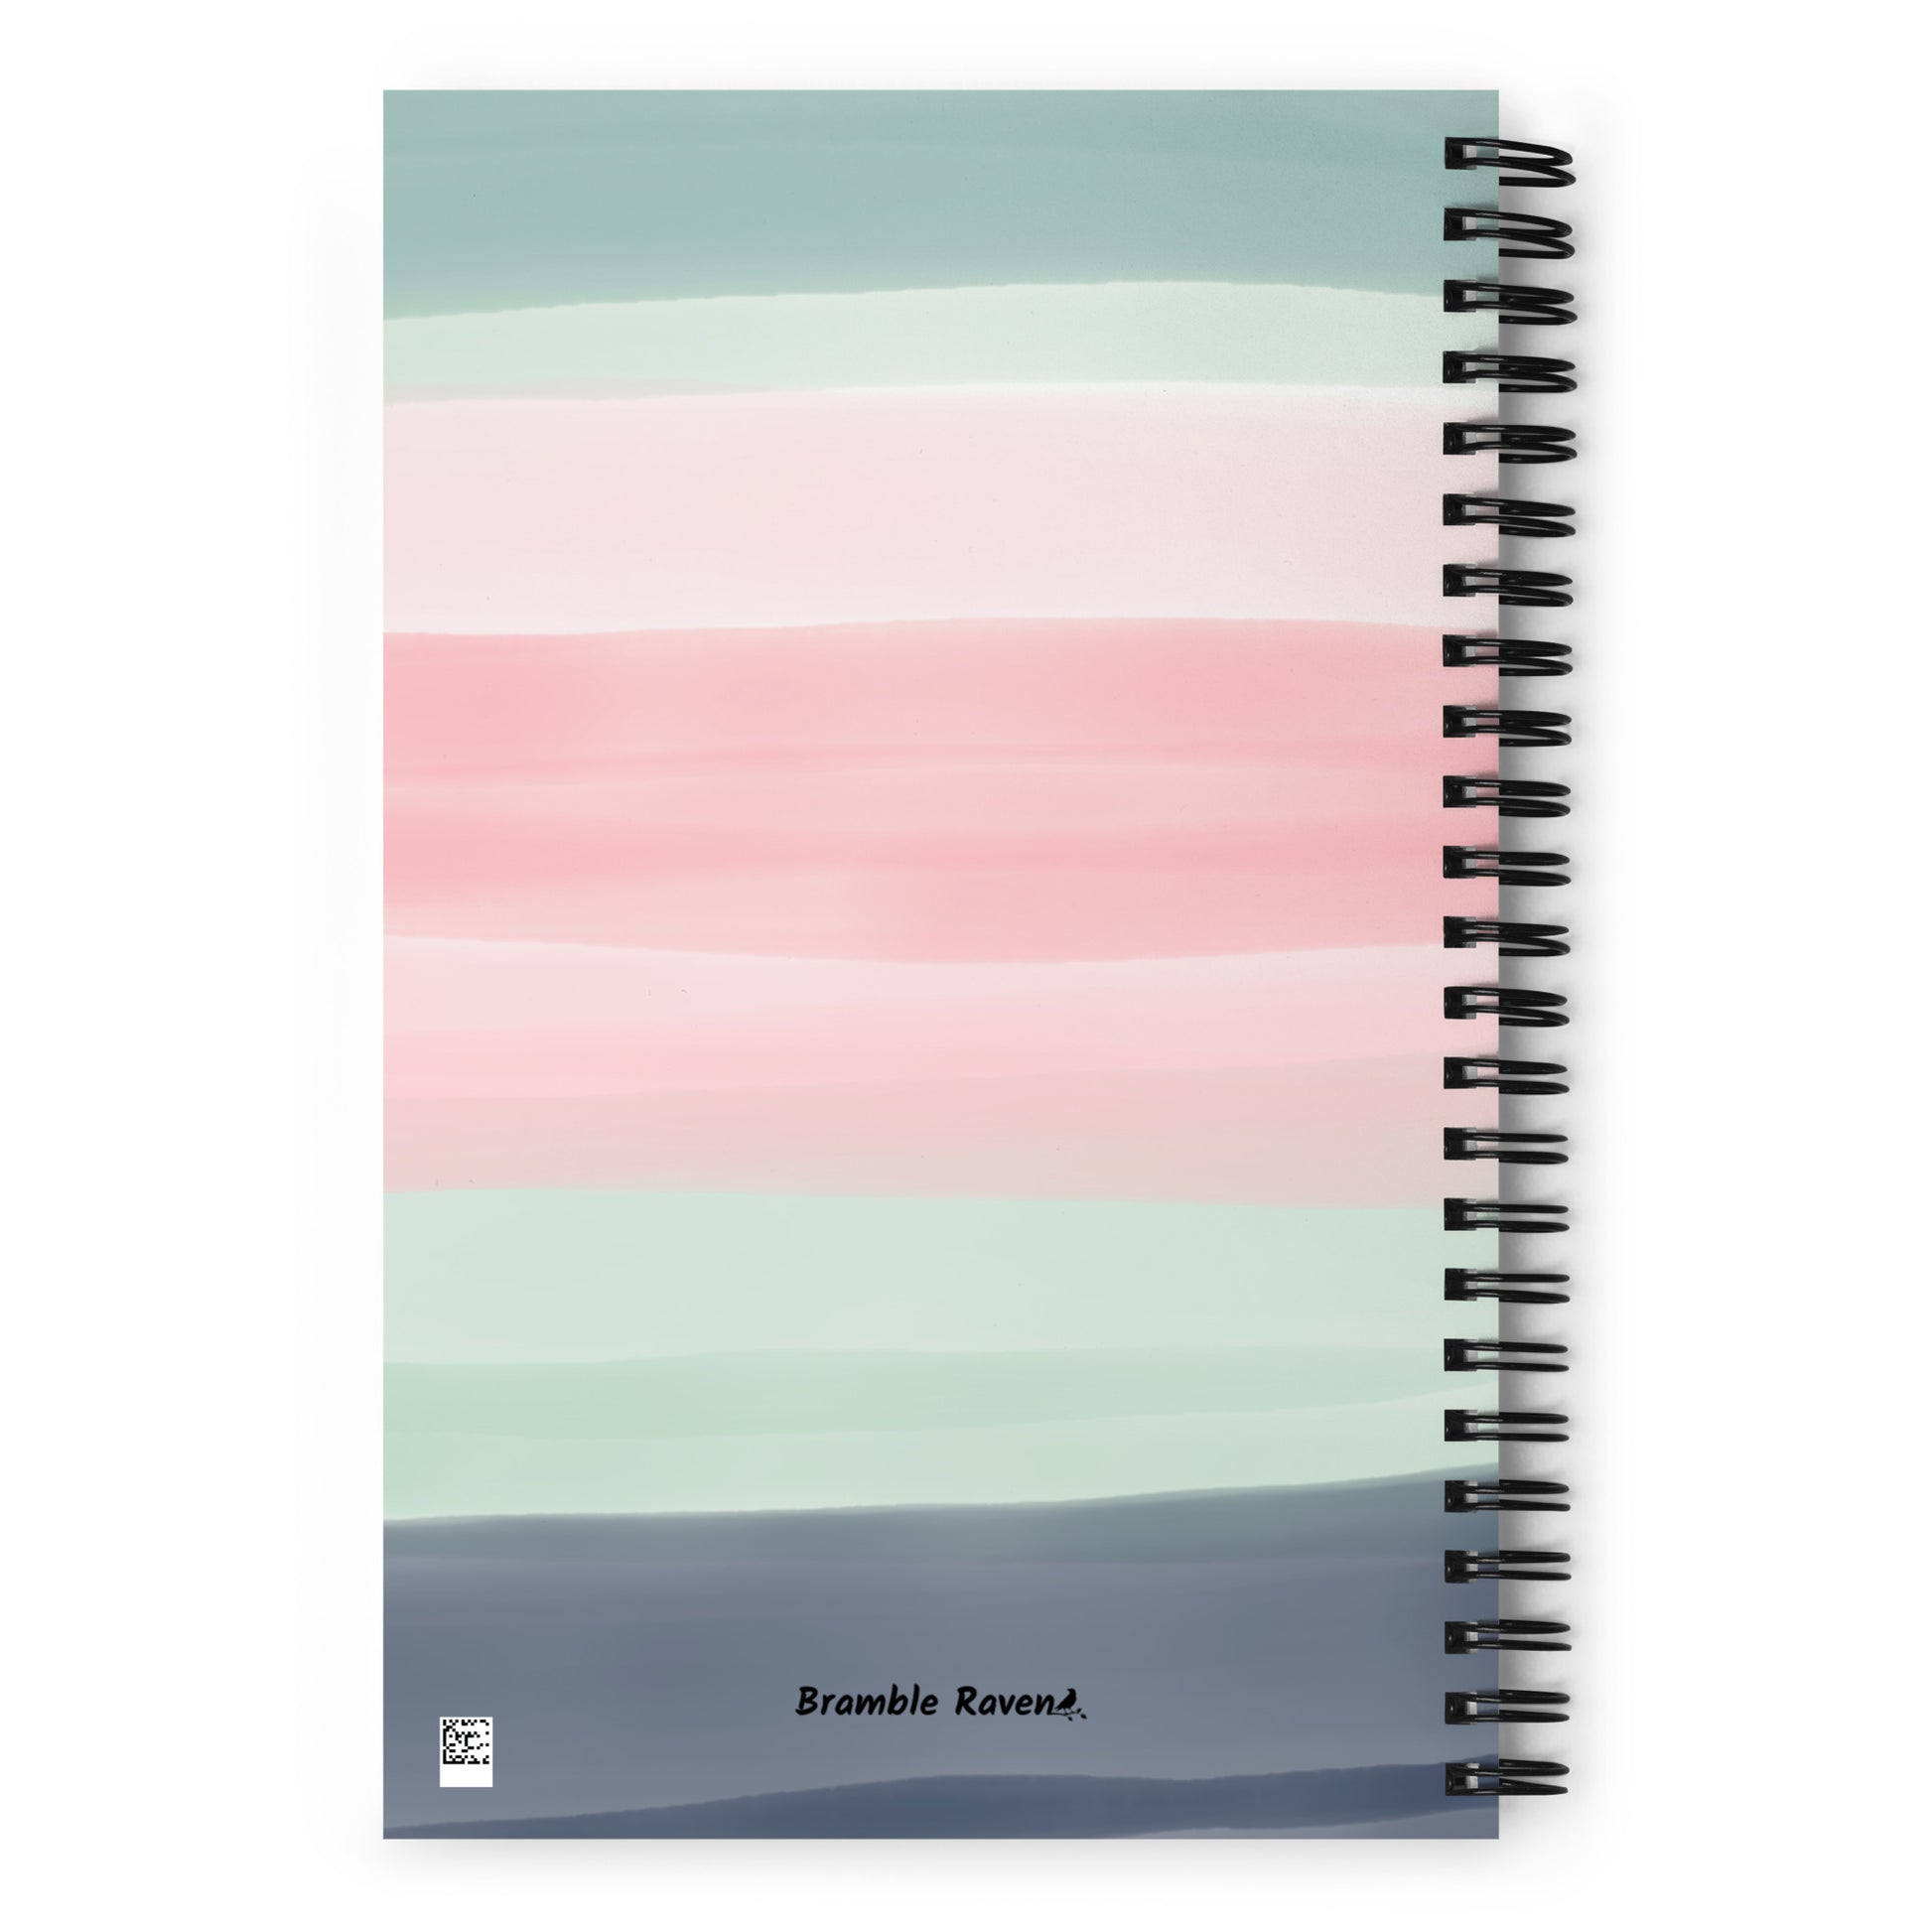 Spiral bound notebook with soft touch cover and 140 dotted pages. Cover features silently judging text and monocled crow on a striped background. Measures 5.5 inches by 8.5 inches. Back view of notebook.